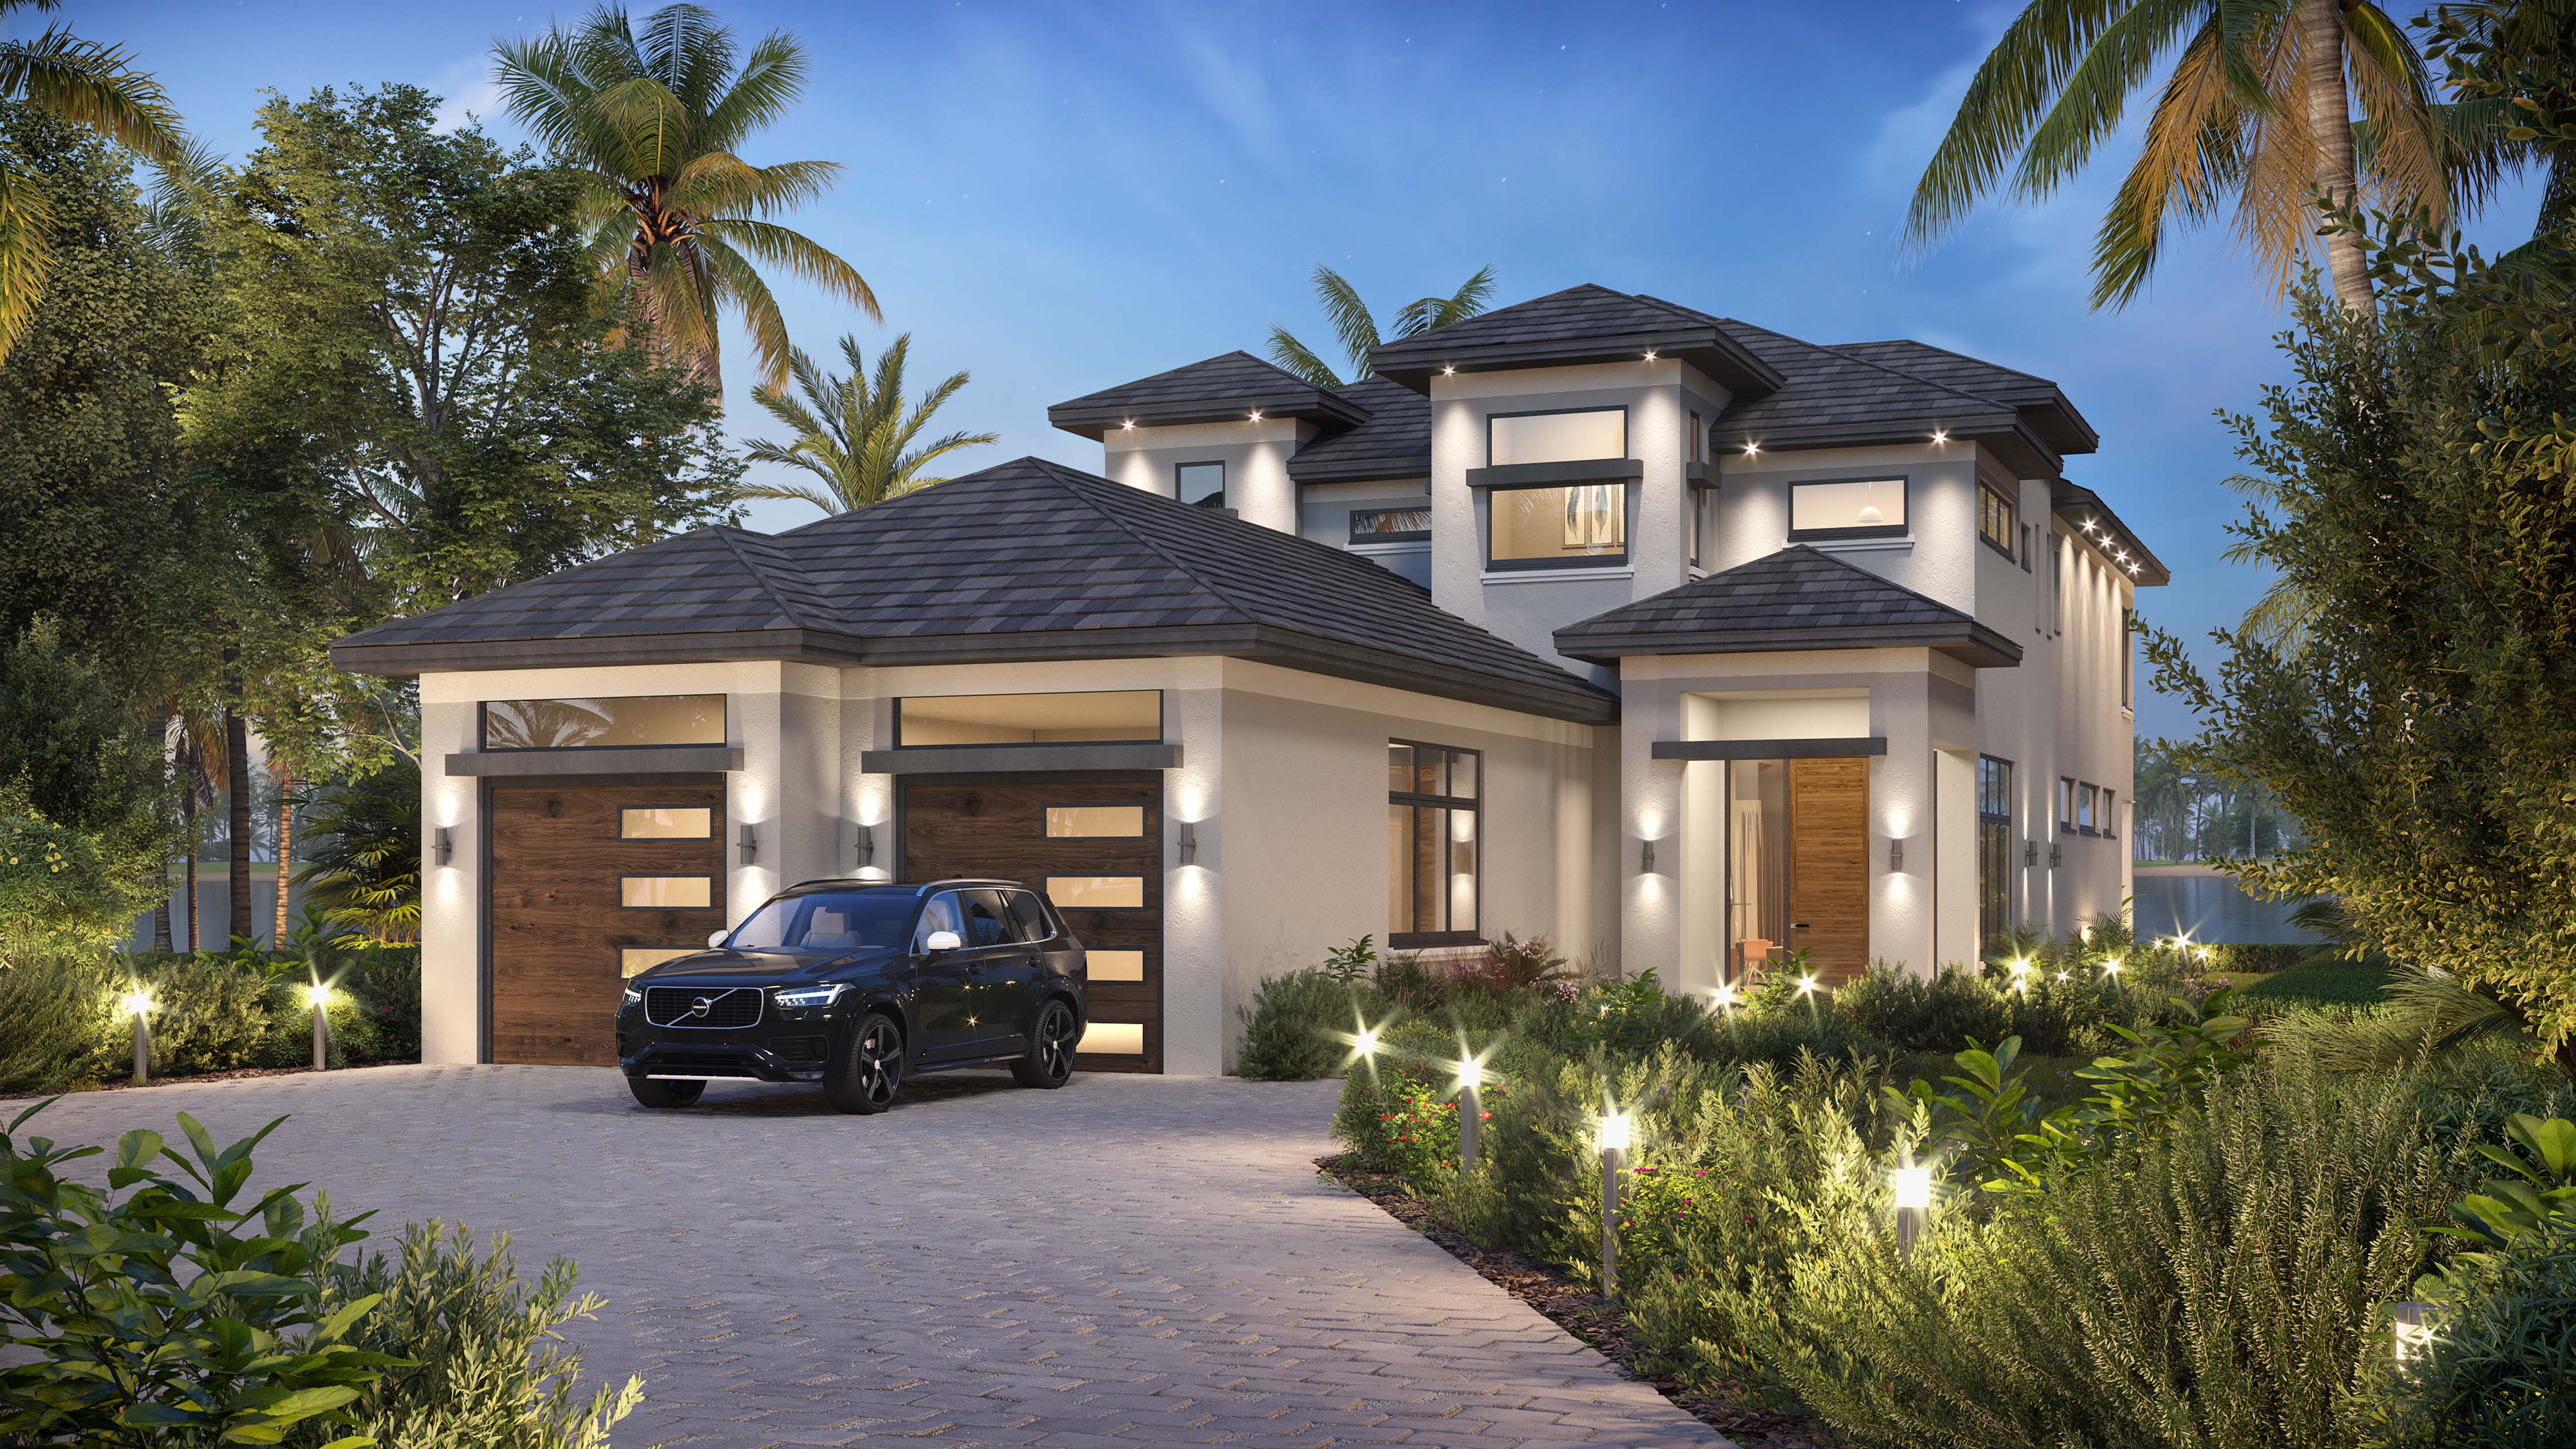 New Luxury Estate Model Homes Planned for Isola Bella Talis Park